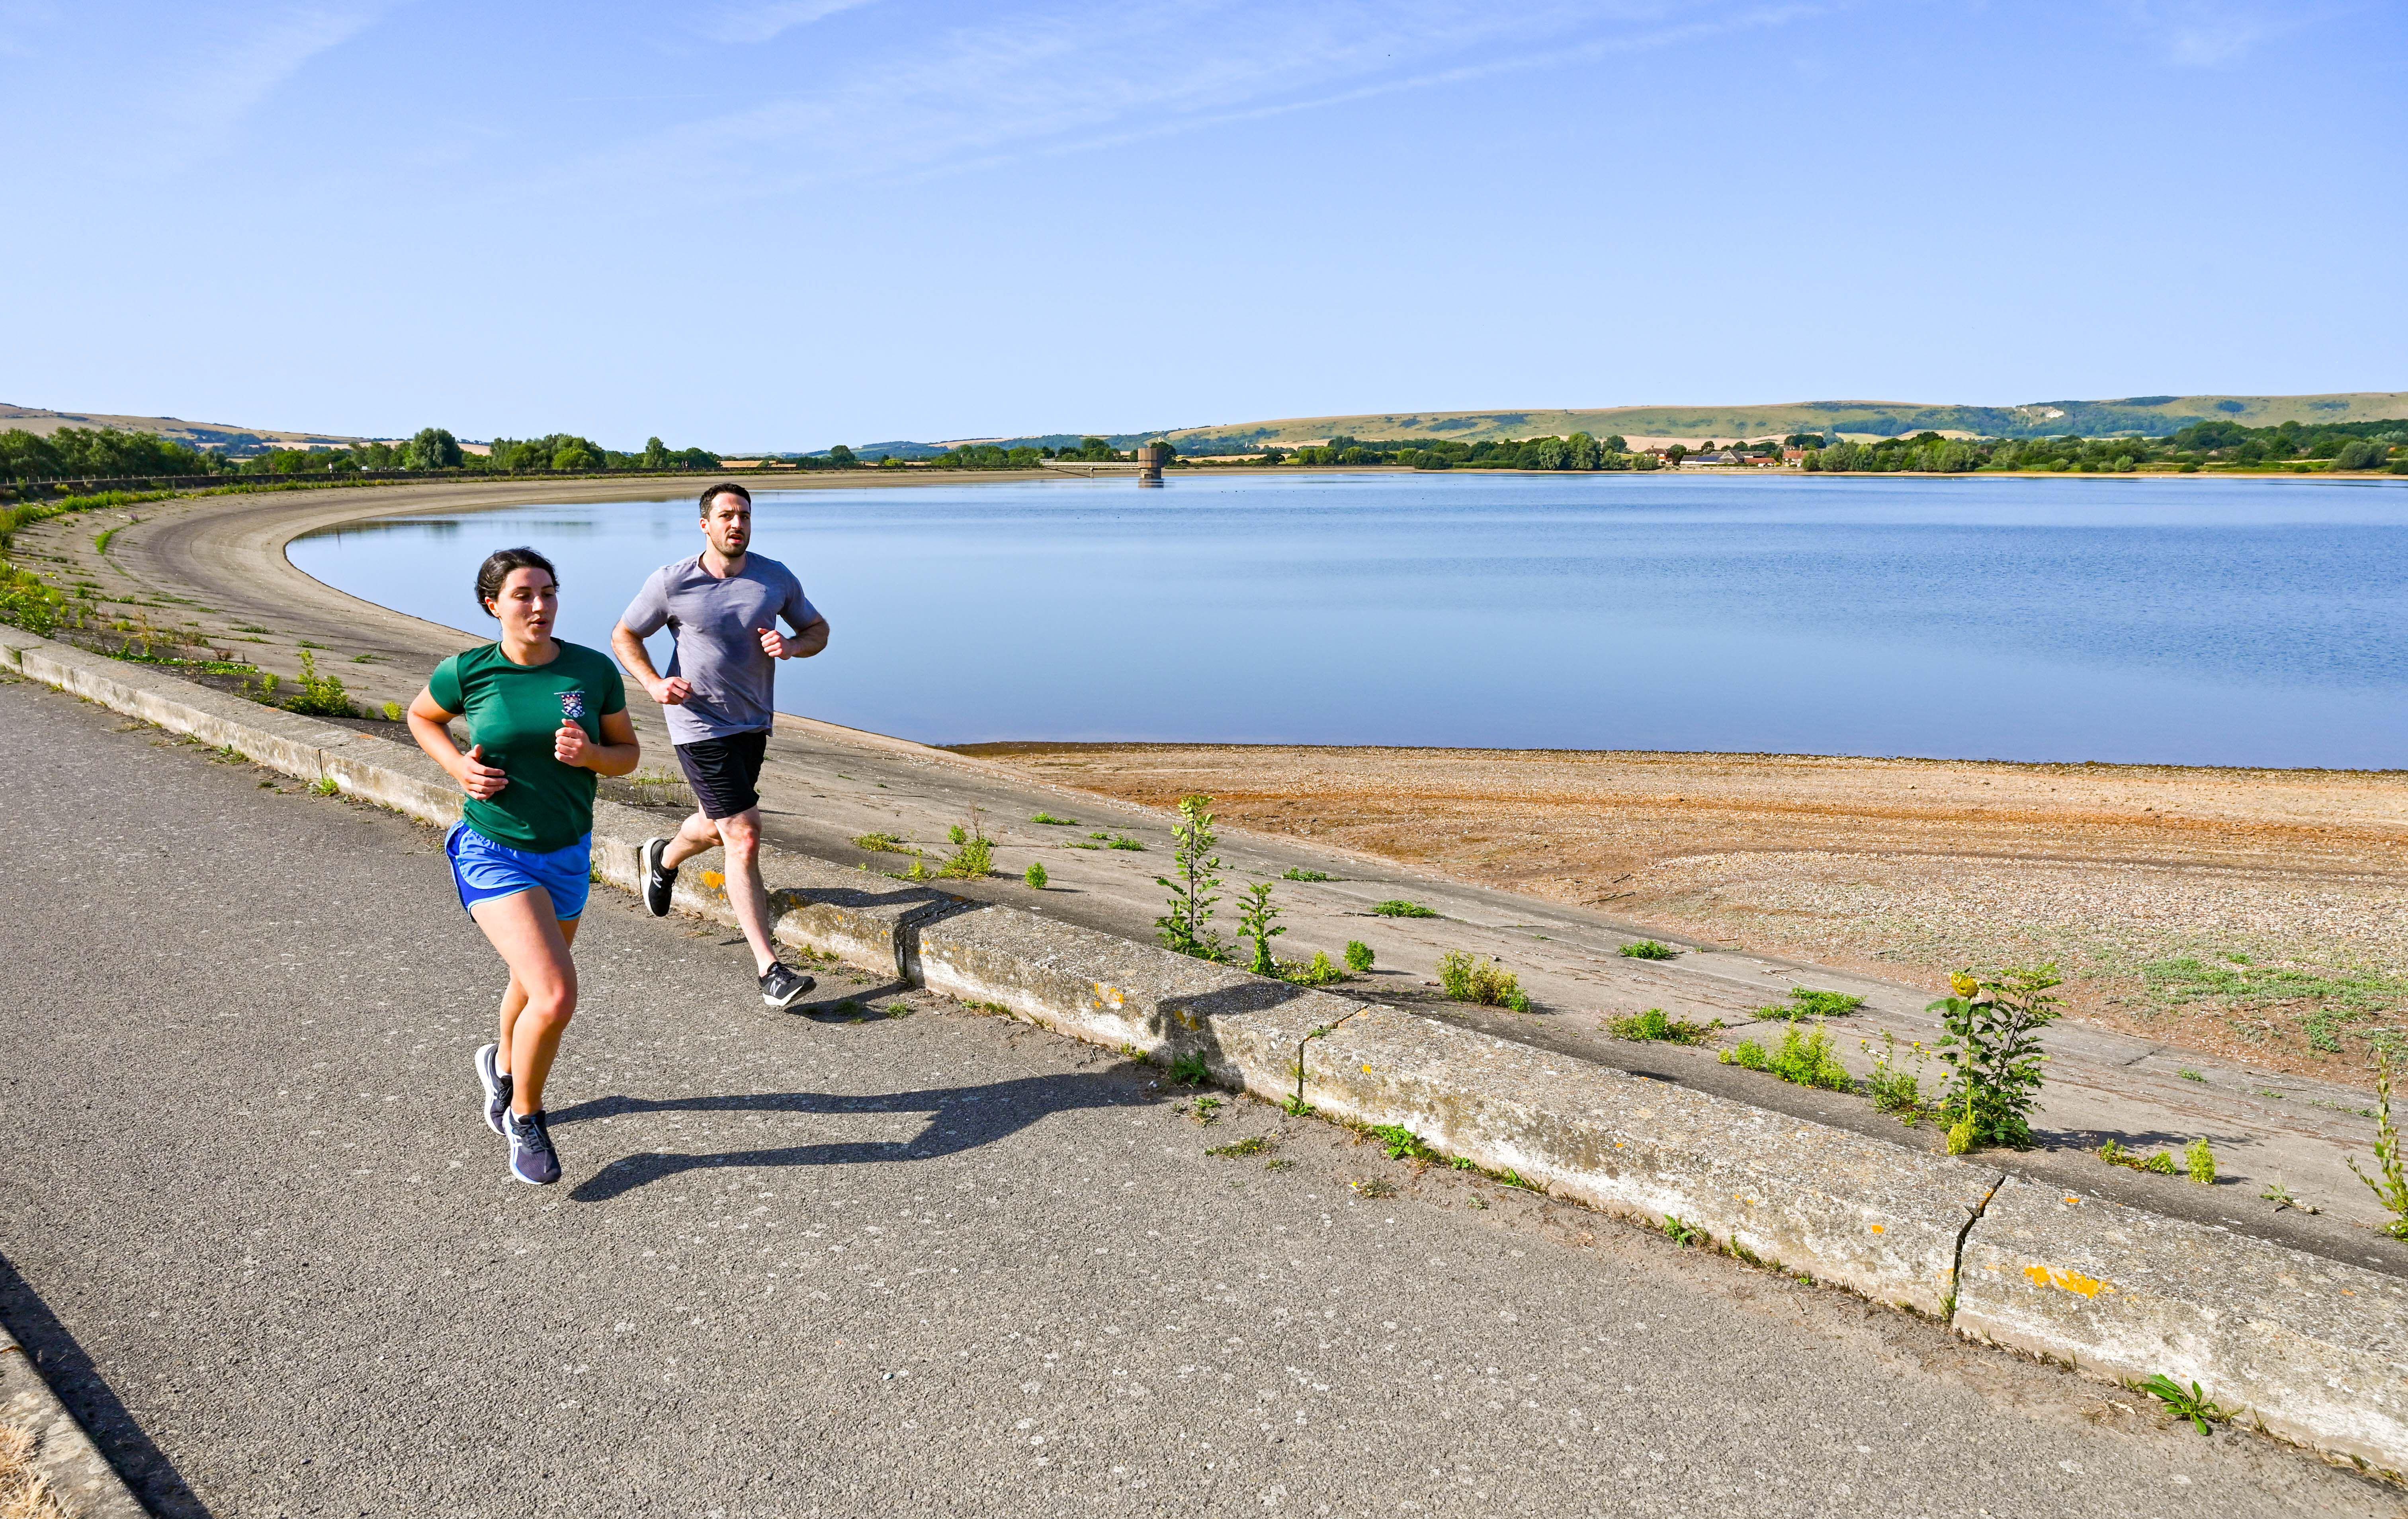 Early morning runners at Arlington Reservoir near Lewes in East Sussex in July